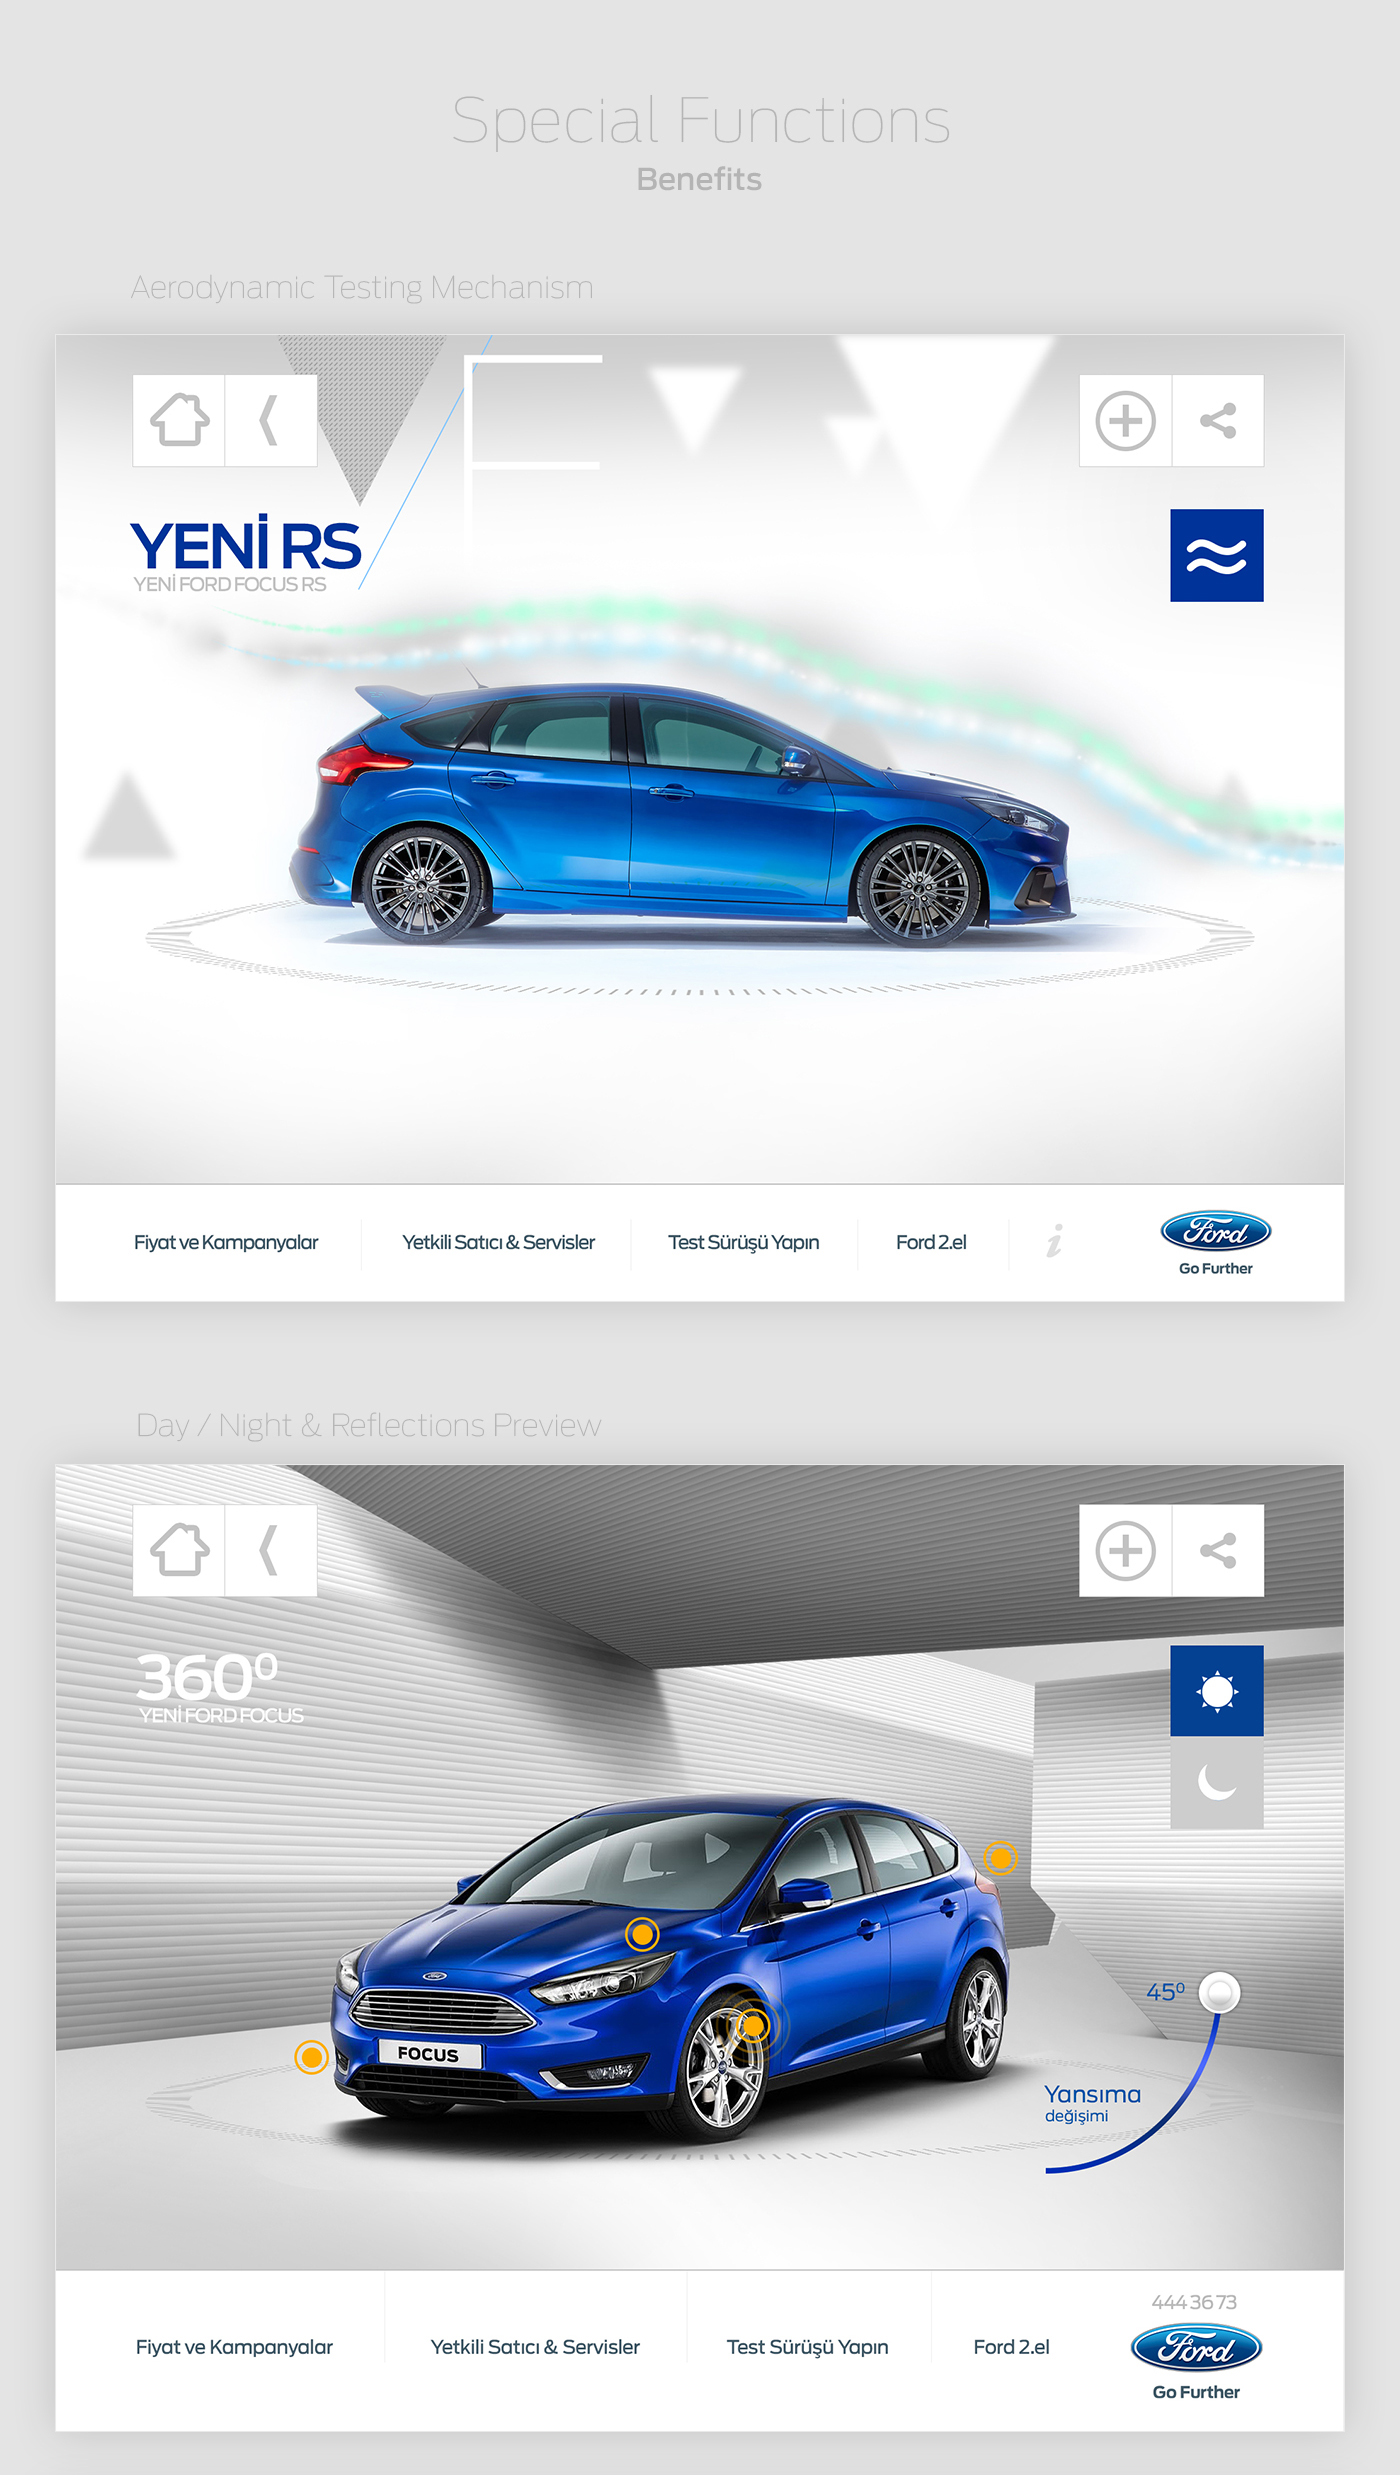 Ford app application iPad mobile user Interface Experience Focus CG